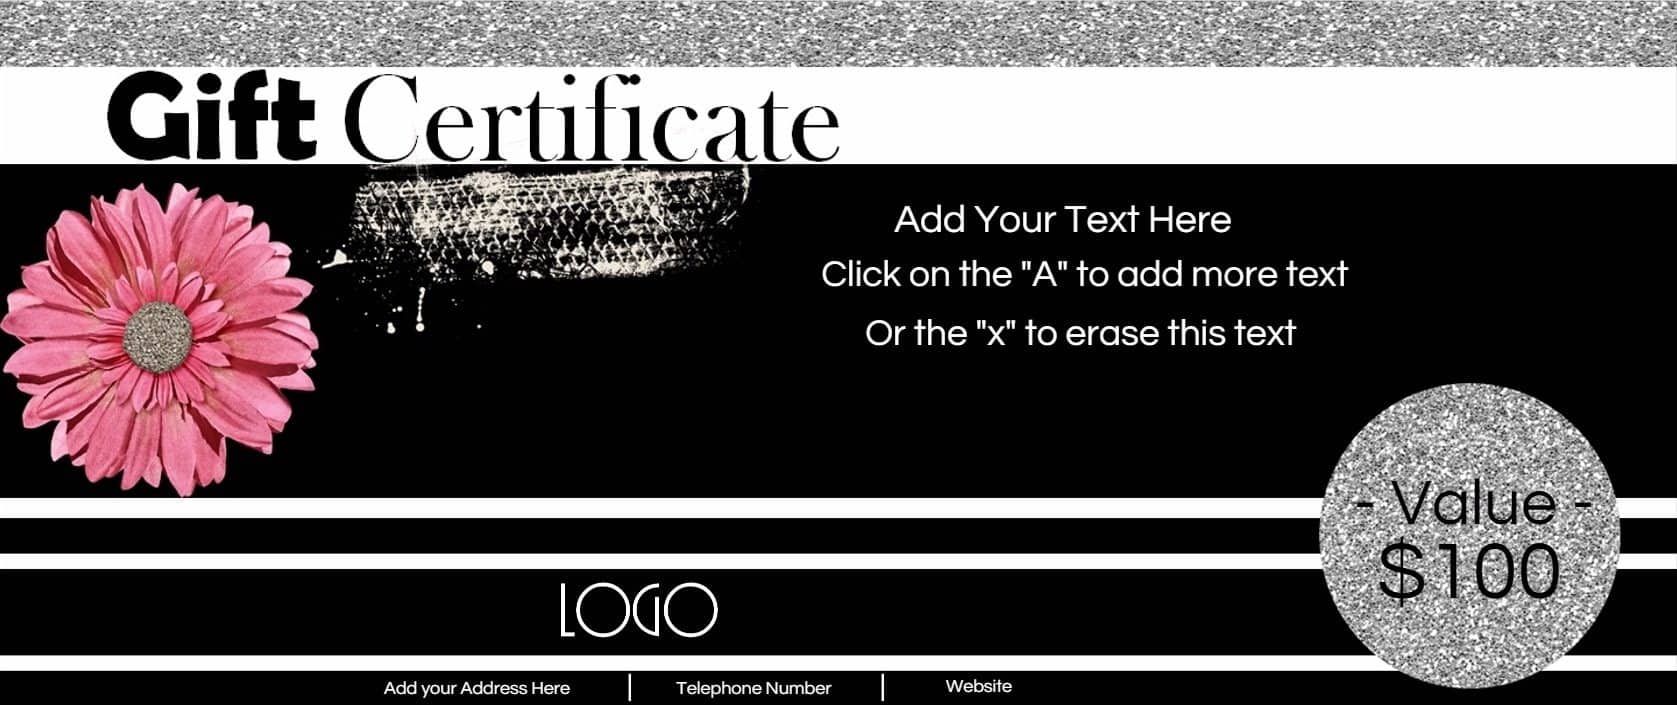 10-tips-to-create-a-gift-certificate-template